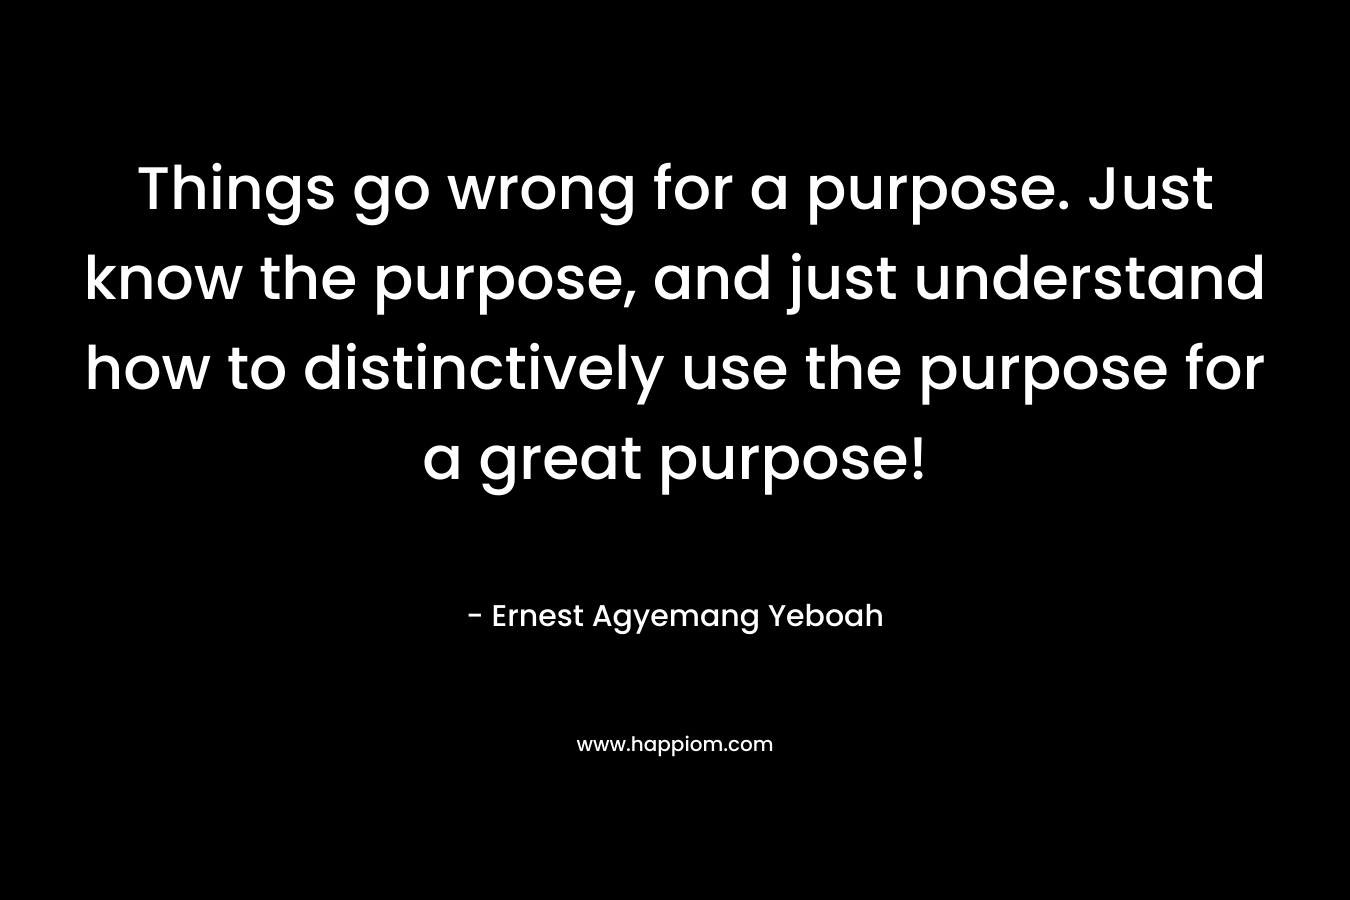 Things go wrong for a purpose. Just know the purpose, and just understand how to distinctively use the purpose for a great purpose!